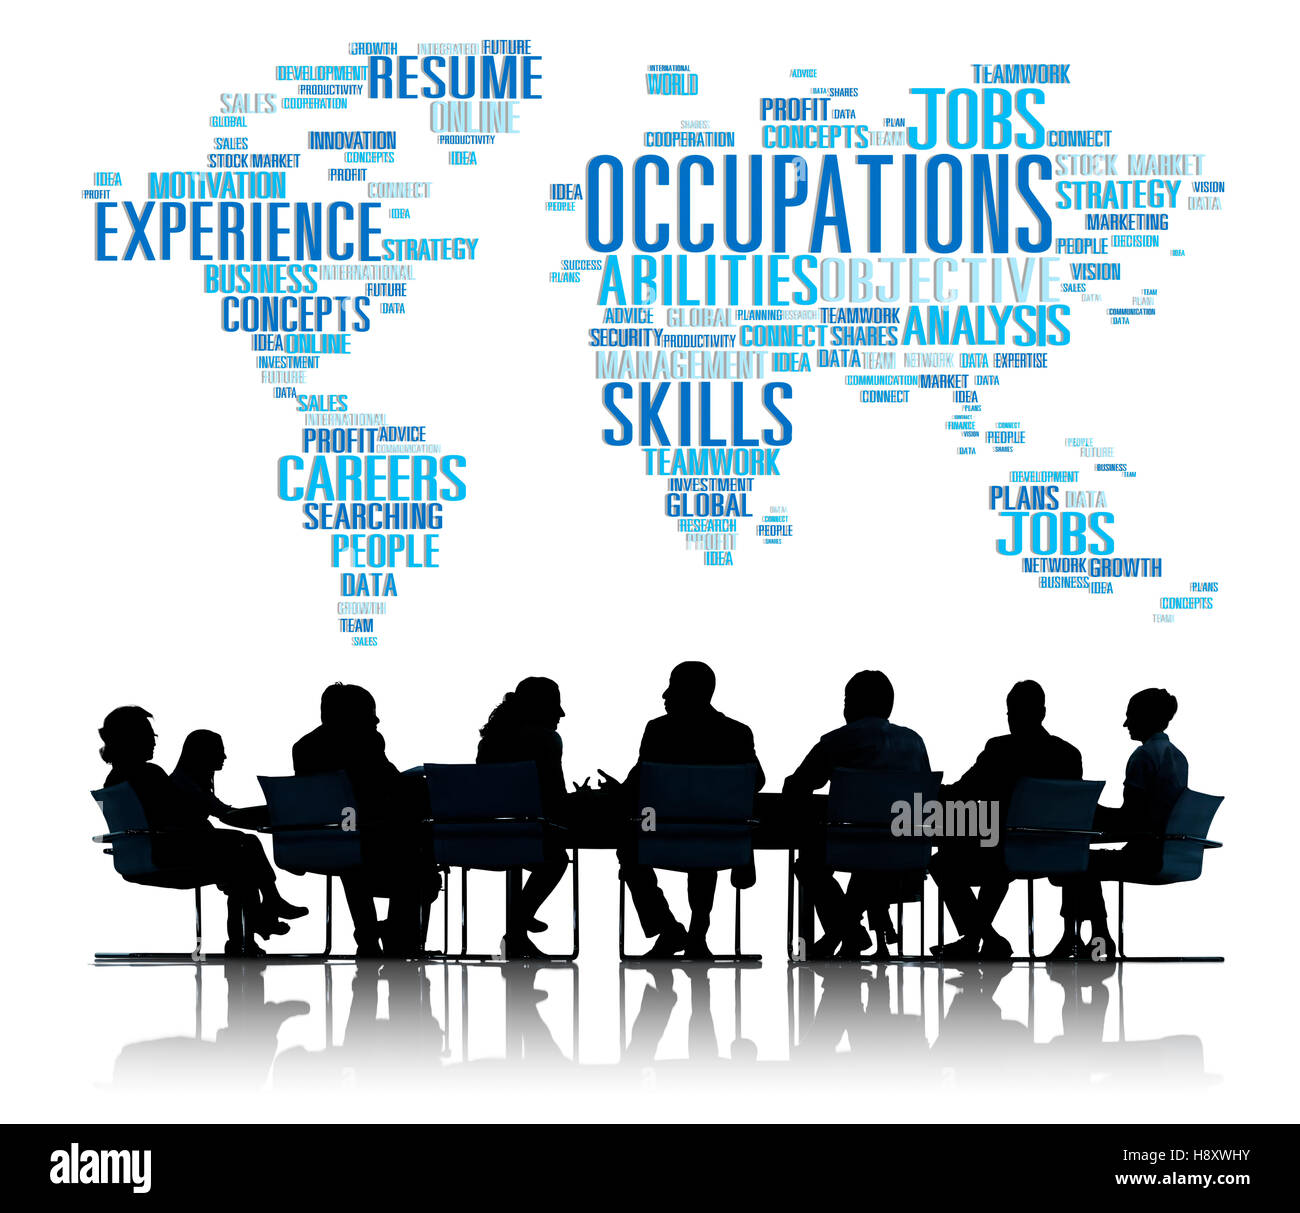 Occupation Job Careers Expertise Human Resources Concept Stock Photo